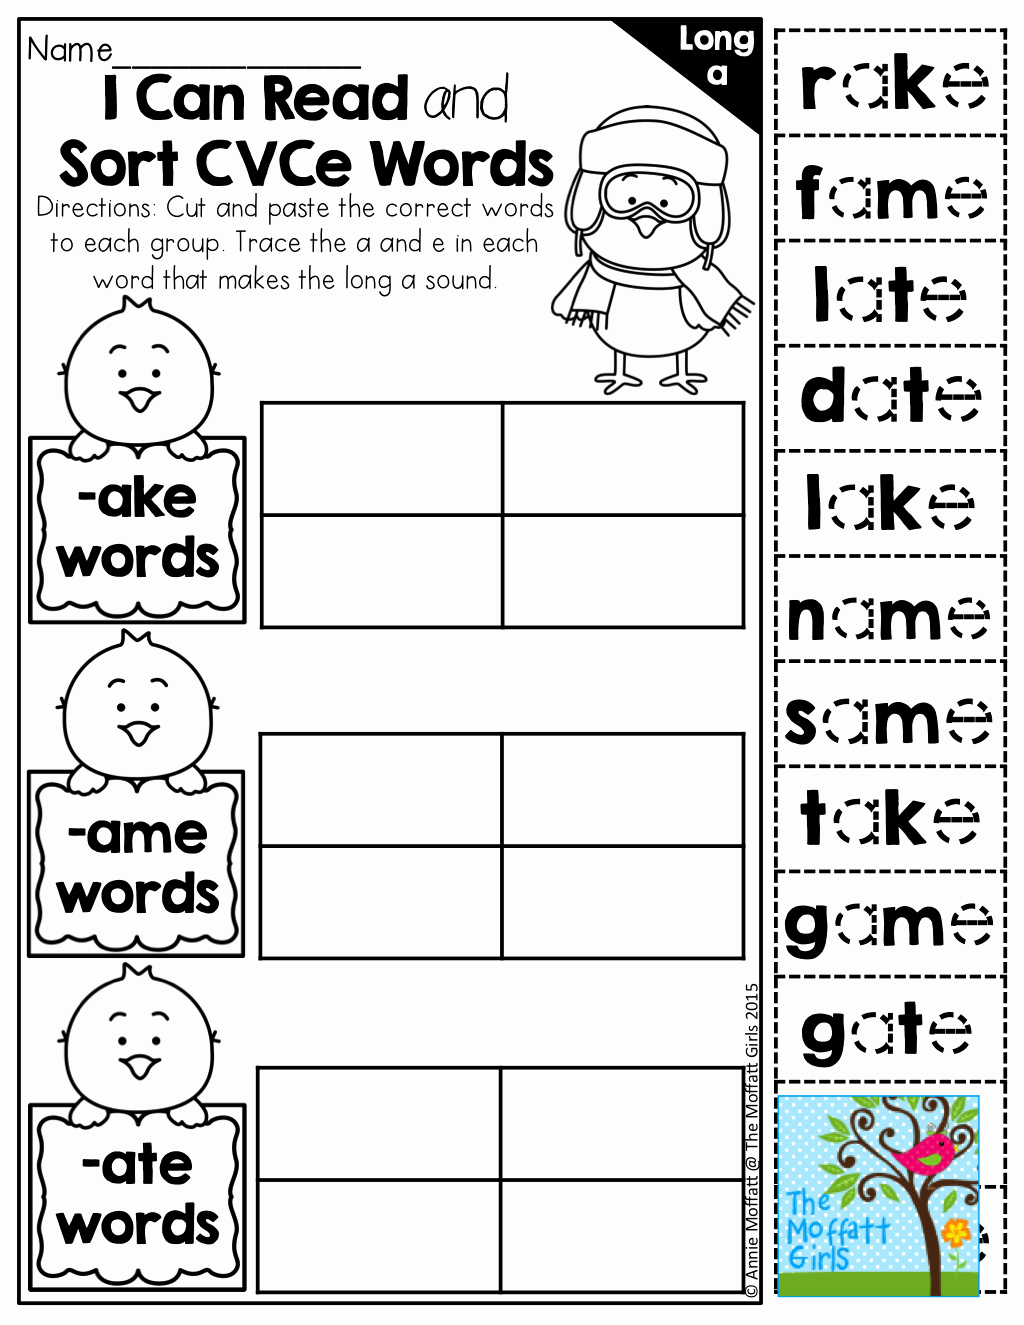 Long Vowel Silent E Worksheet Awesome April Fun Filled Learning